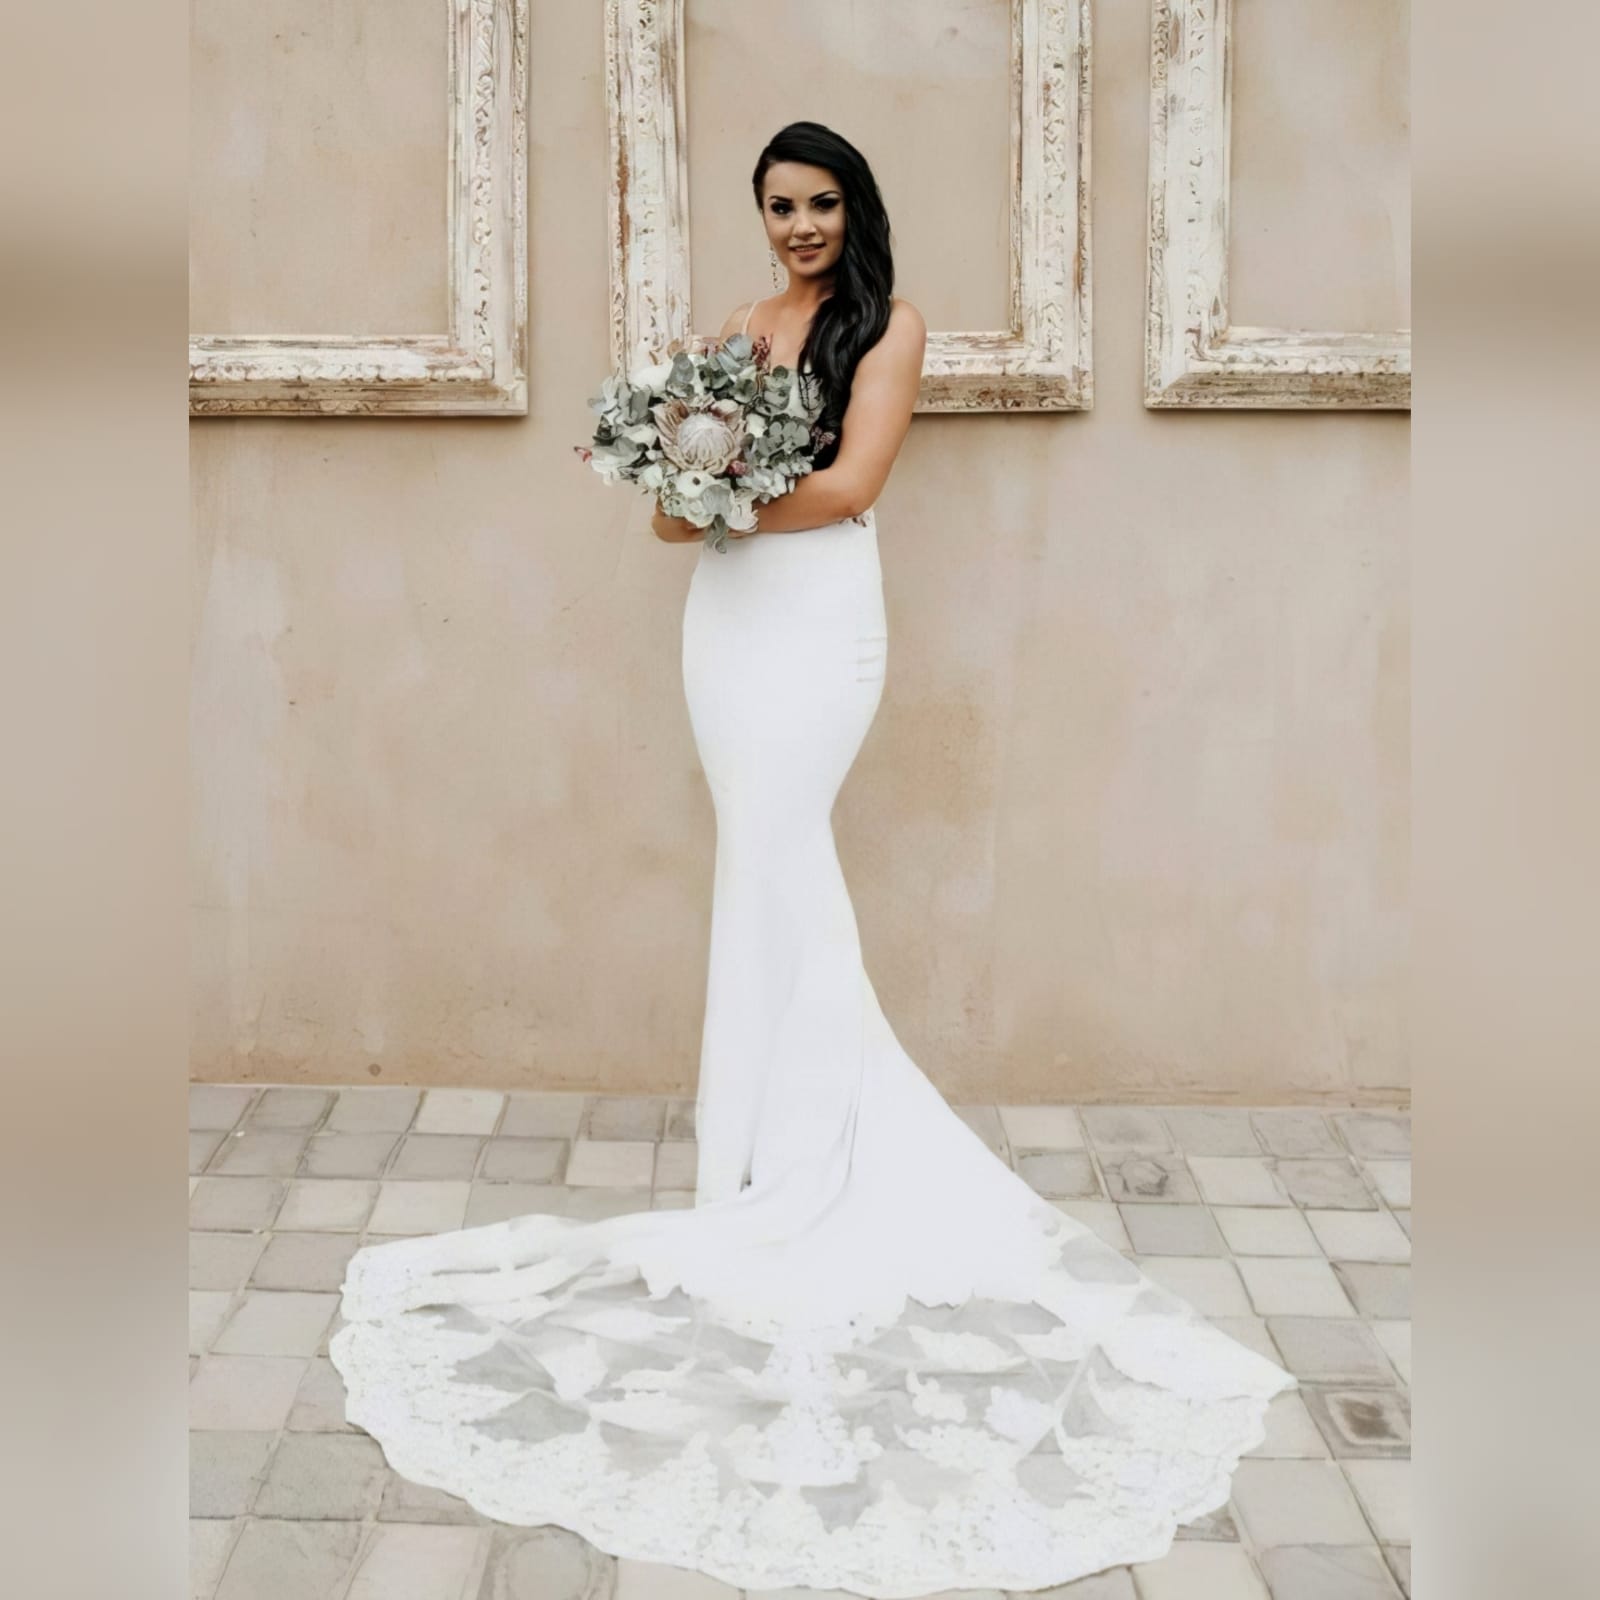 White lace mermaid wedding dress with lace train 2 white lace mermaid wedding dress, lace bodice with a v neckline, low open back and thin shoulder straps detailed with diamante. Lace from the waist down, creating a long sheer lace train. With a train hookup and a matching garter.